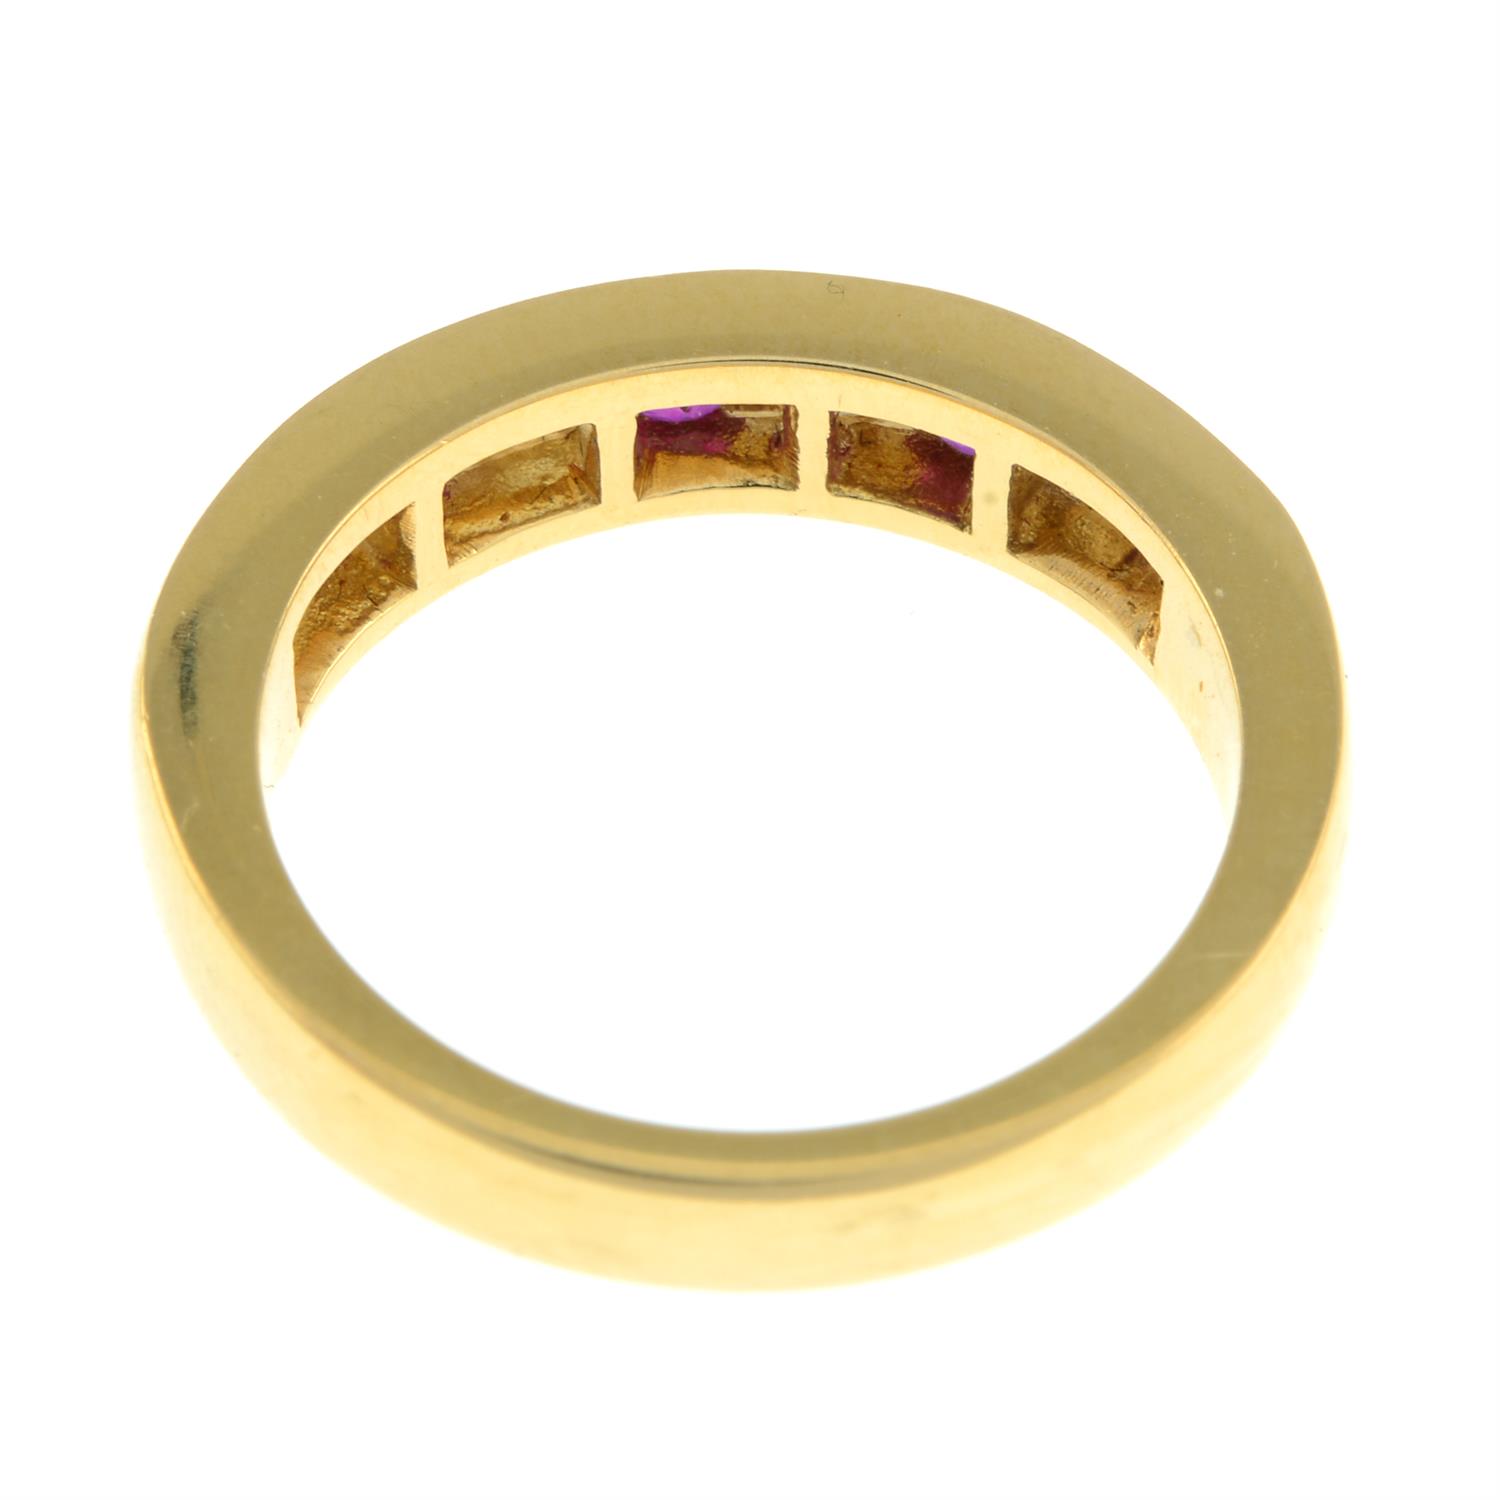 18ct gold ruby and diamond half eternity ring - Image 3 of 5